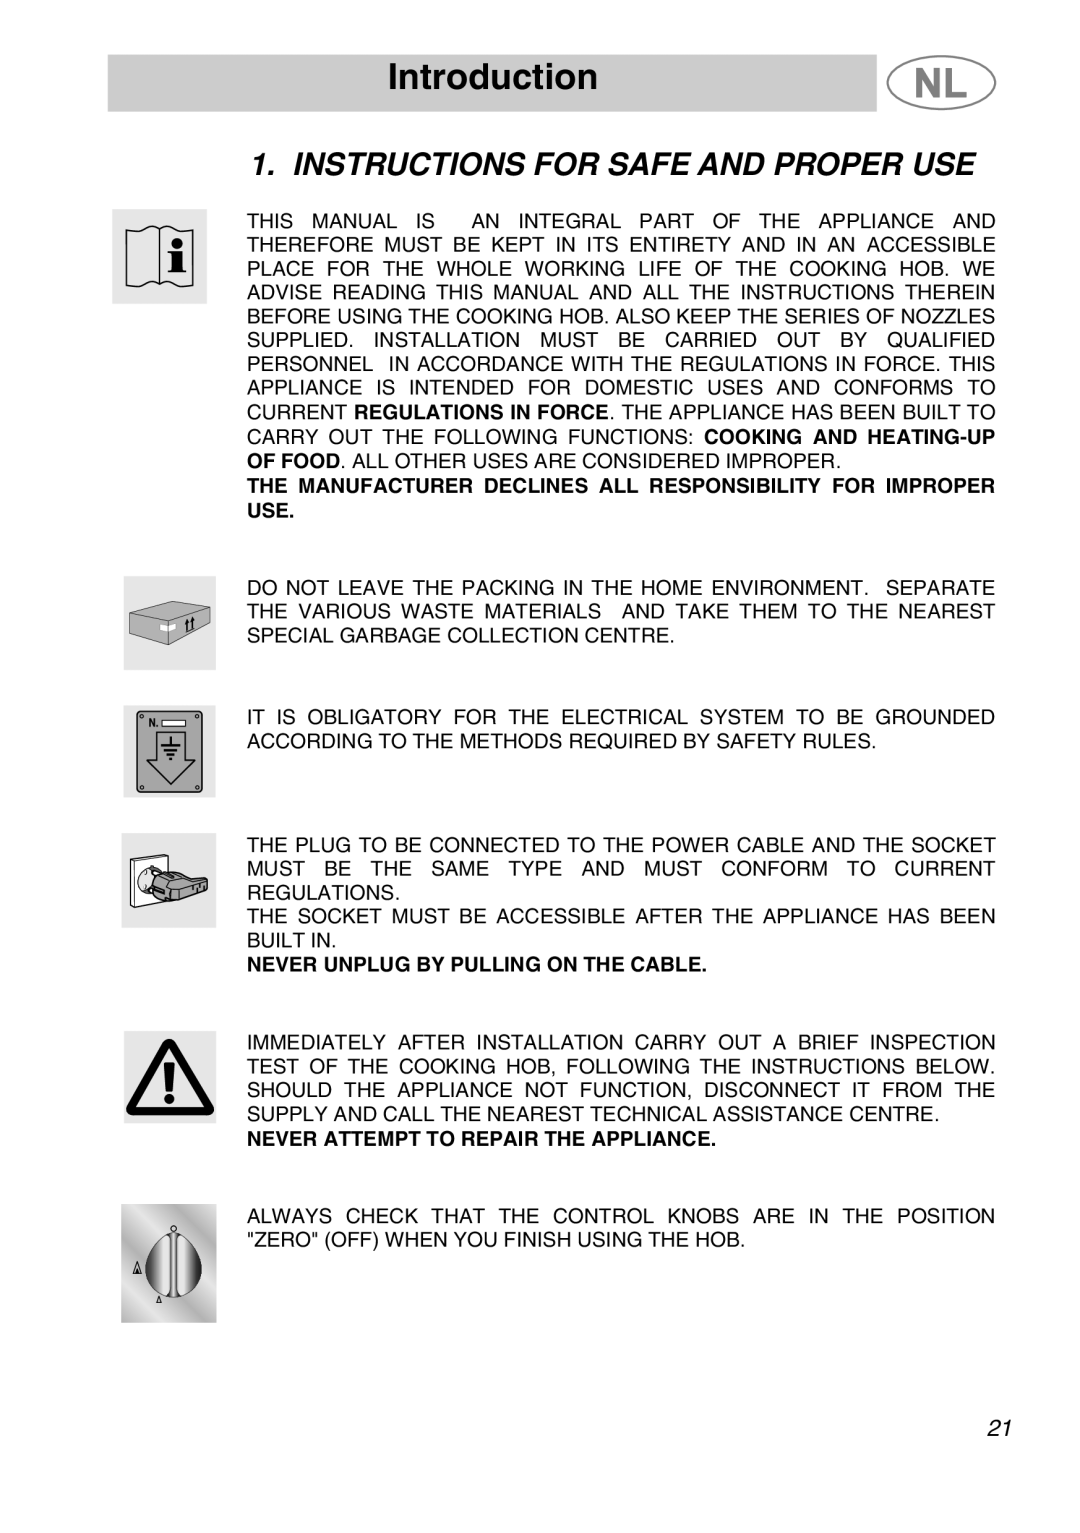 Smeg GKCO955, GKC955 manual Introduction, Instructions For Safe And Proper Use, Never Unplug By Pulling On The Cable 